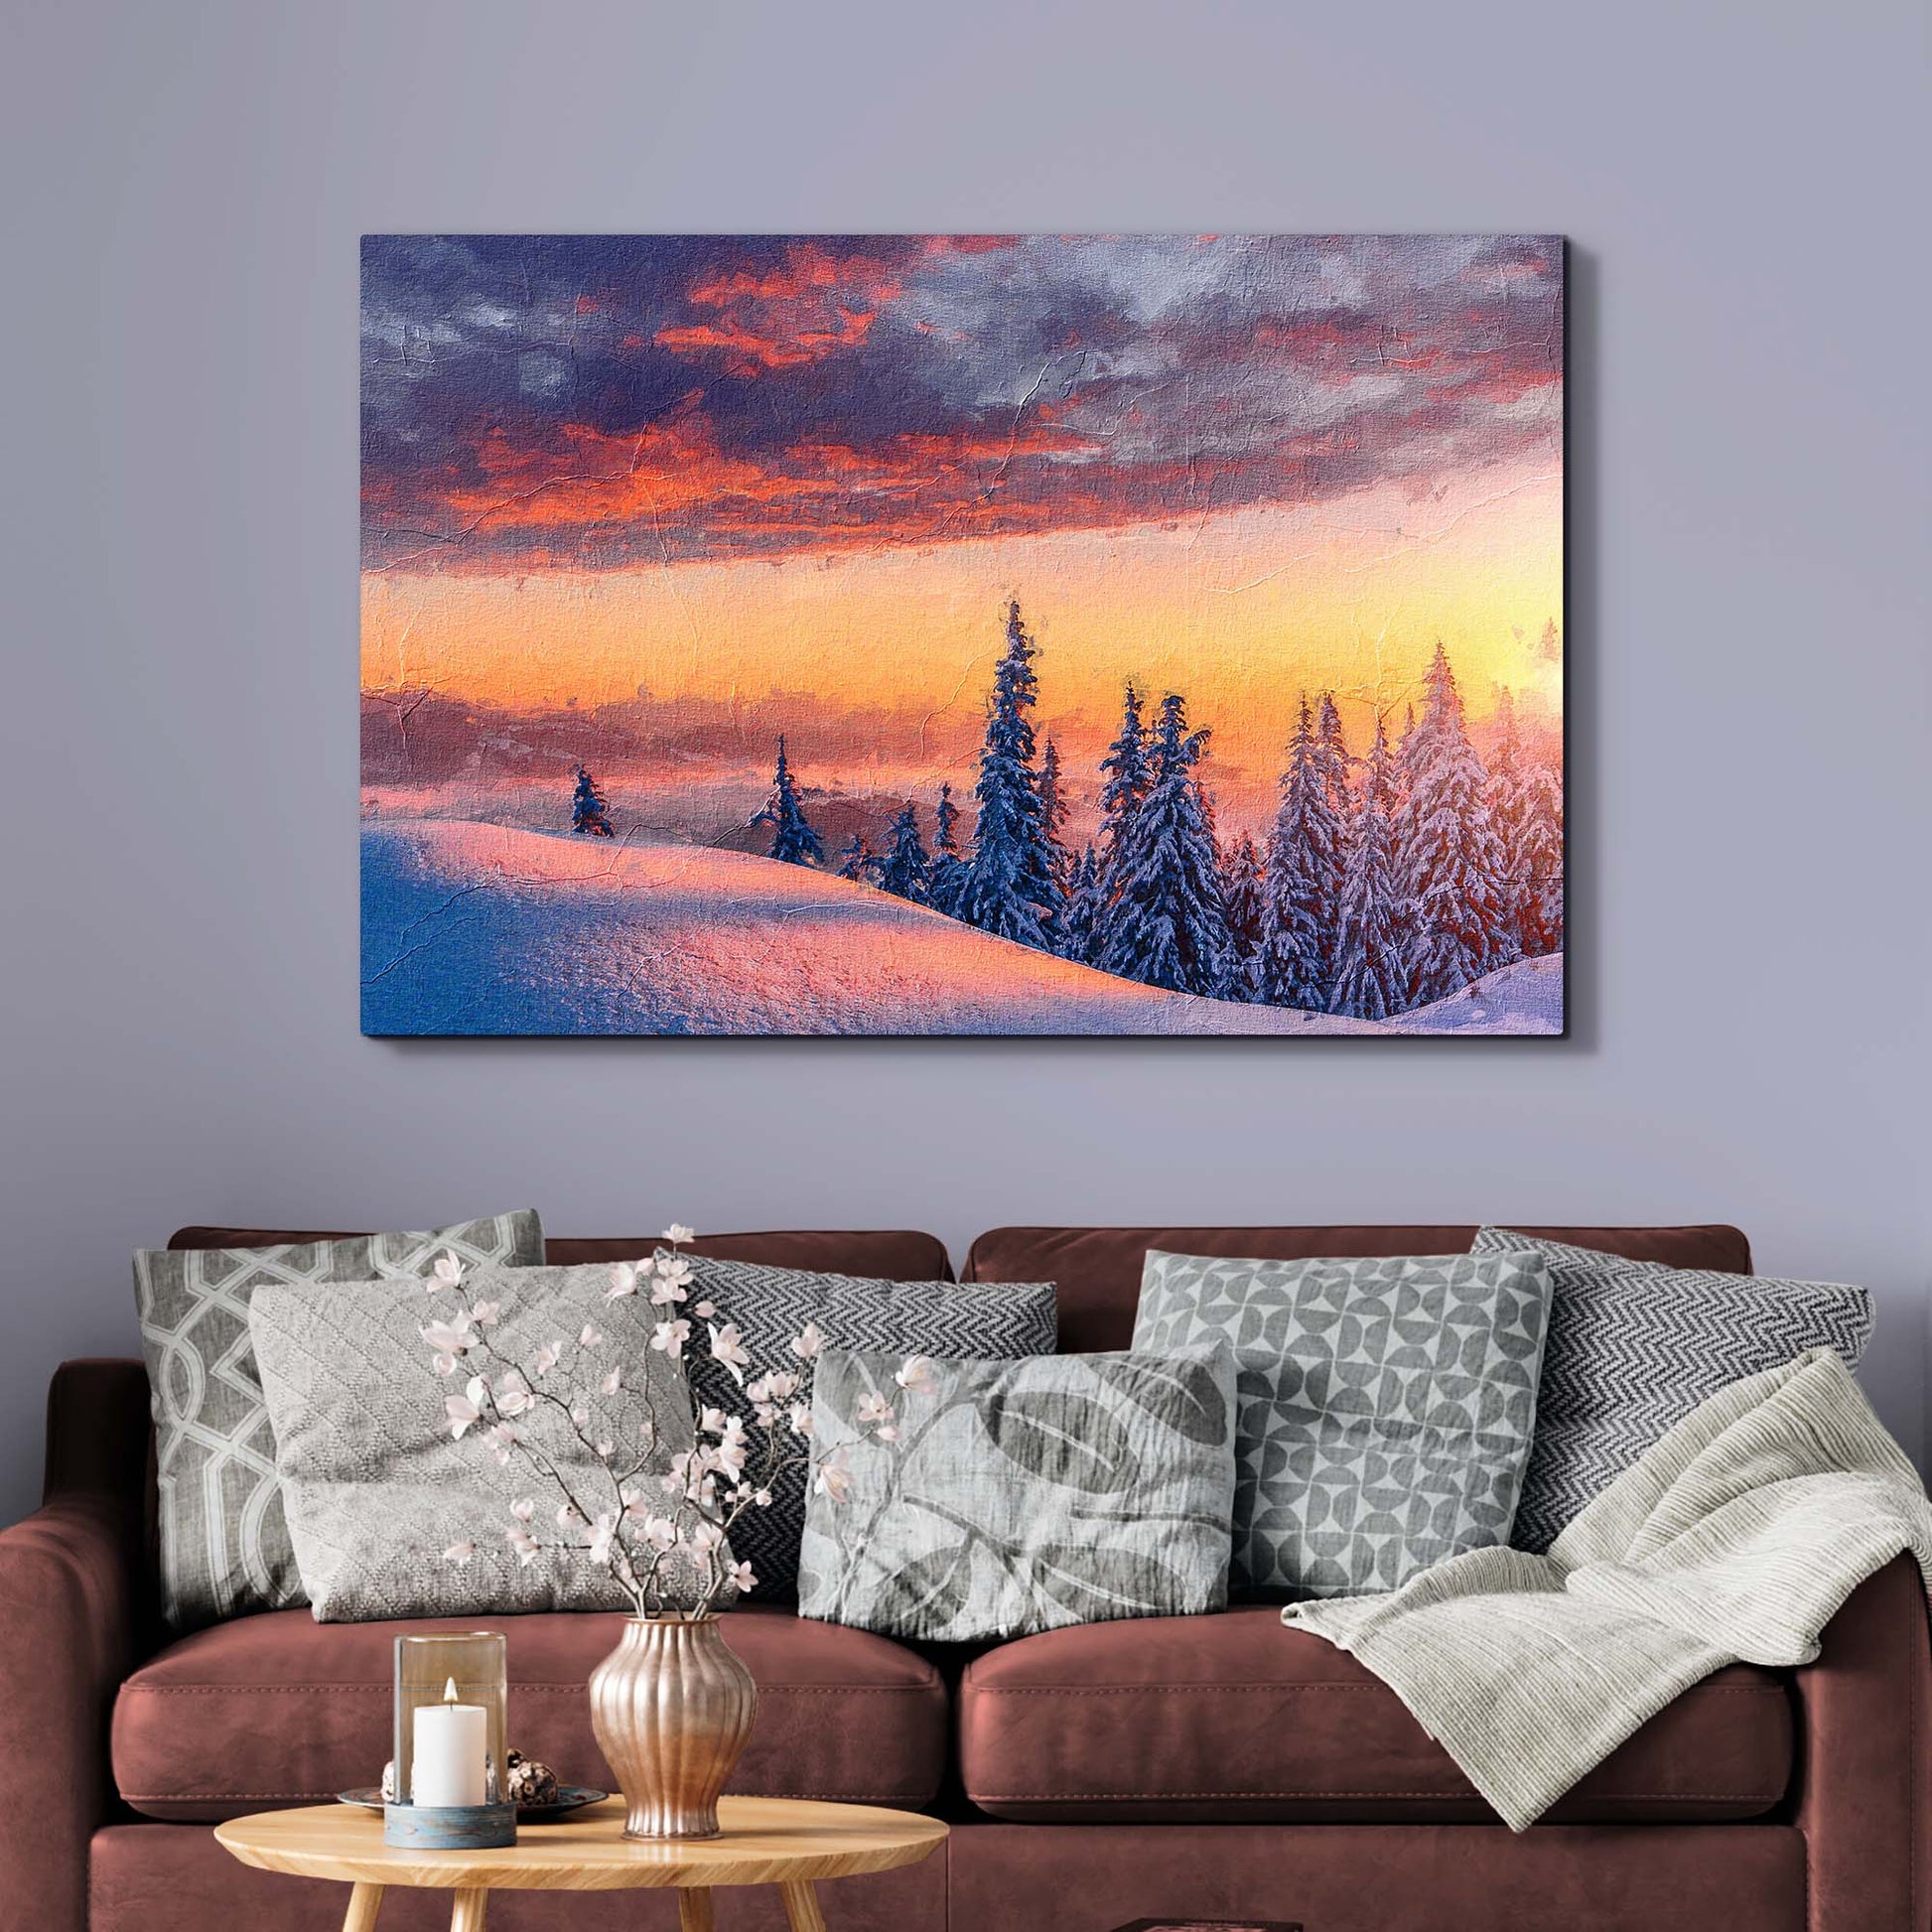 Arctic Mountain At Sunset Canvas Wall Art Style 2 - Image by Tailored Canvases